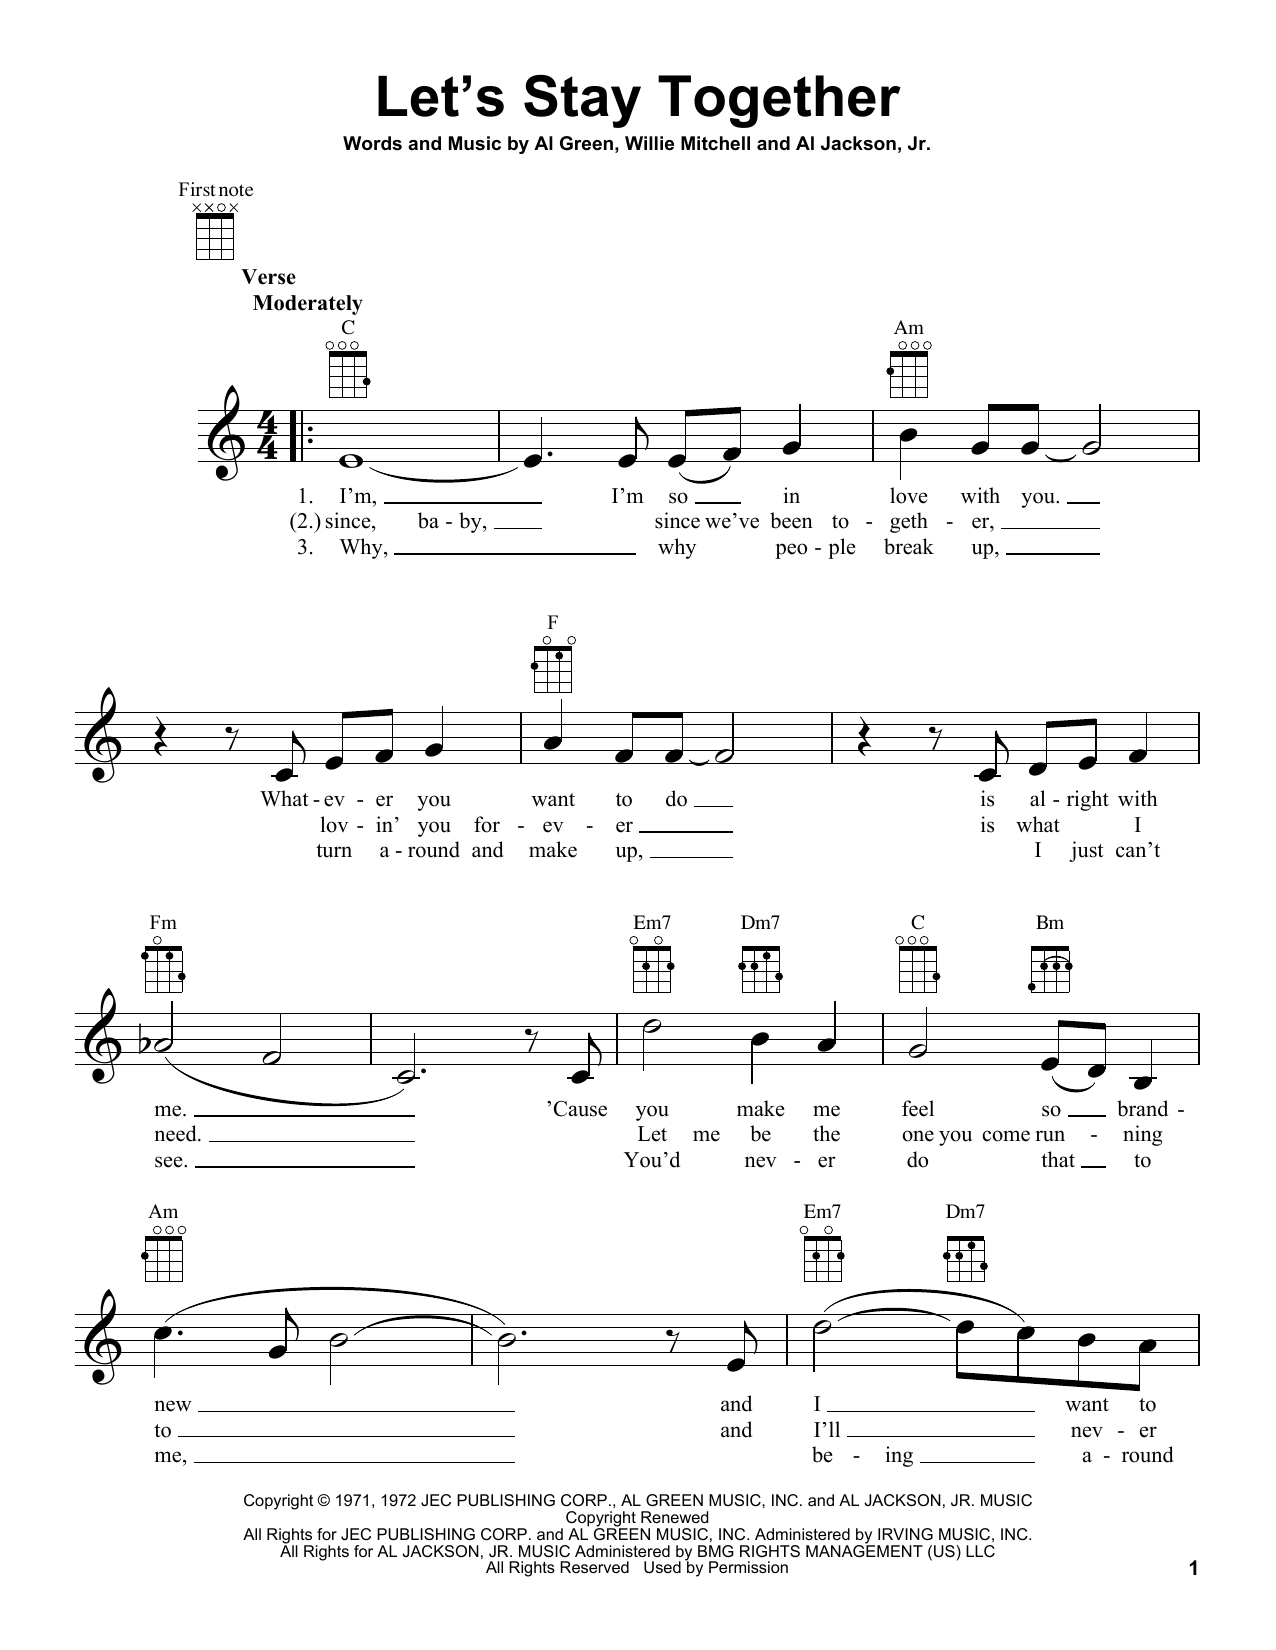 Let's Stay Together Chords Sheet Music Digital Files To Print Licensed Willie Mitchell